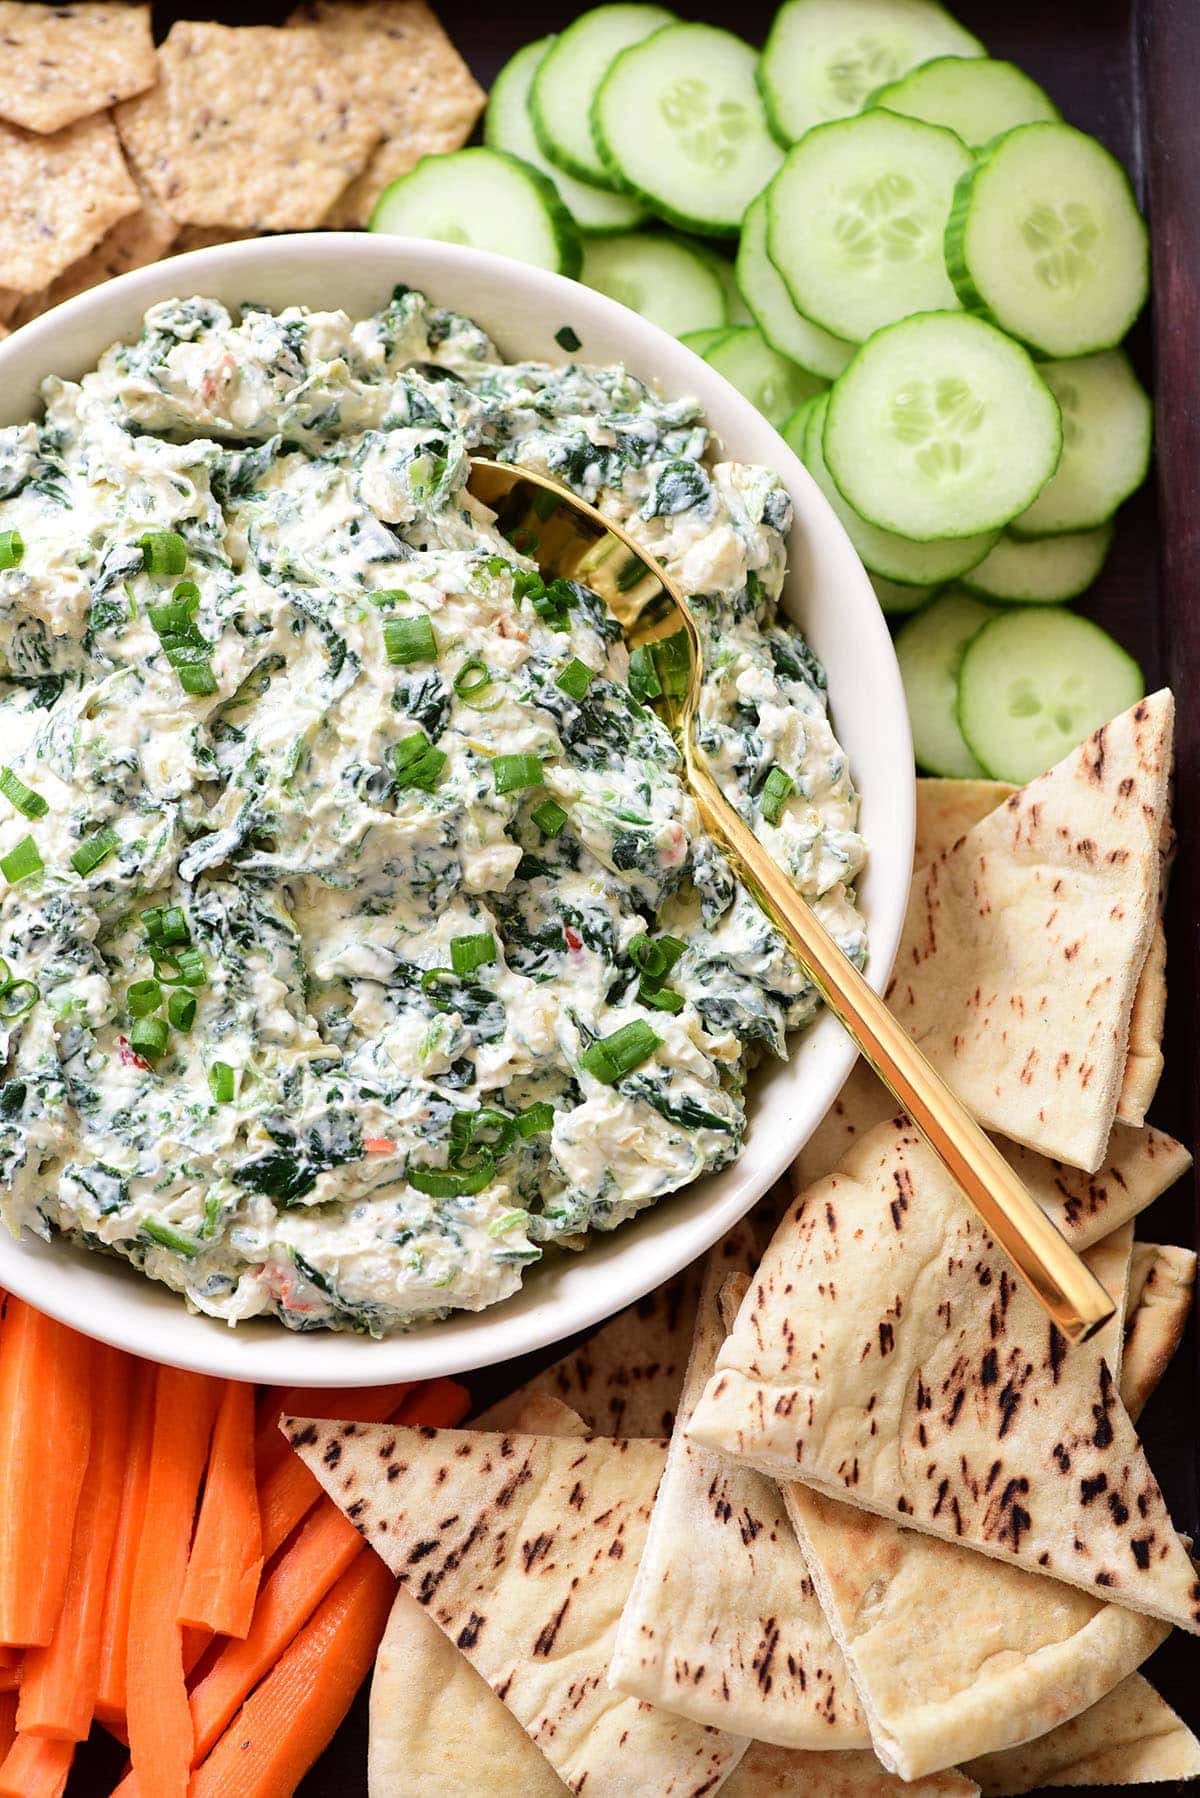 Spinach Dip With Knorr Vegetable Recipe Mix - TidyMom®